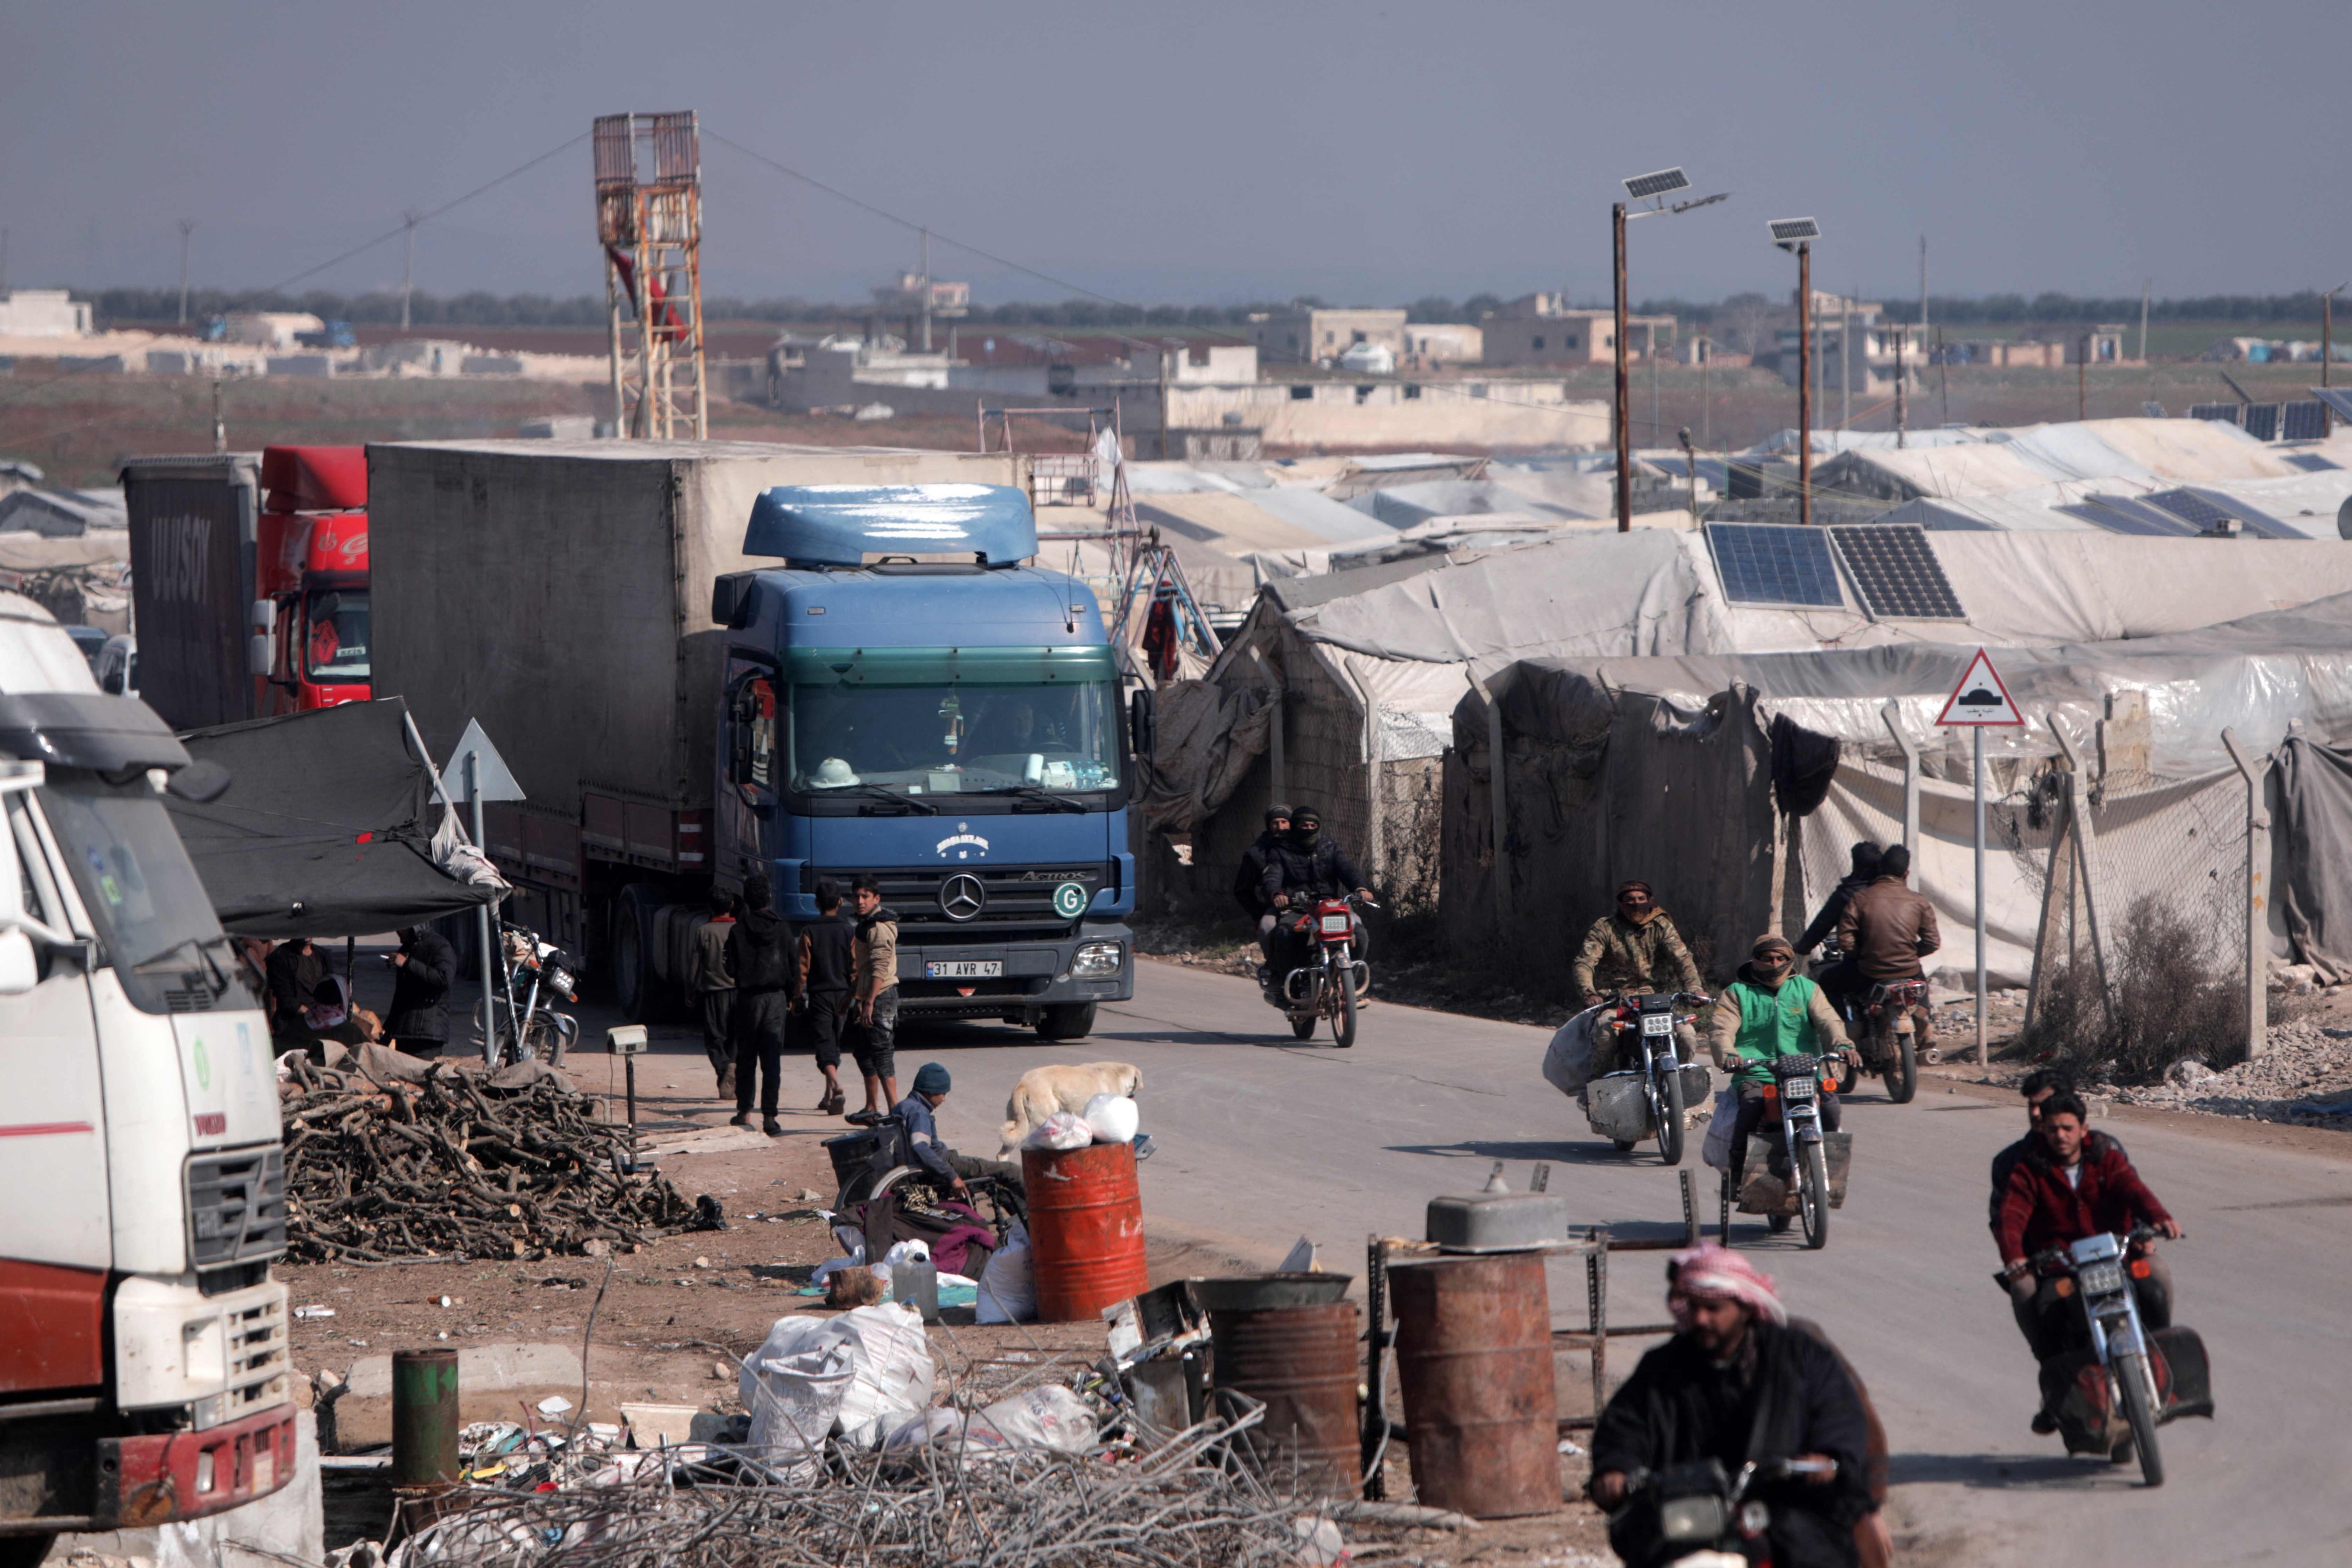 A convoy of trucks from Doctors Without Borders (MSF), carrying aid to earthquake victims, drives past tents sheltering survivors, after entering Syria from Turkey via the al-Hamam border. Photo: AFP